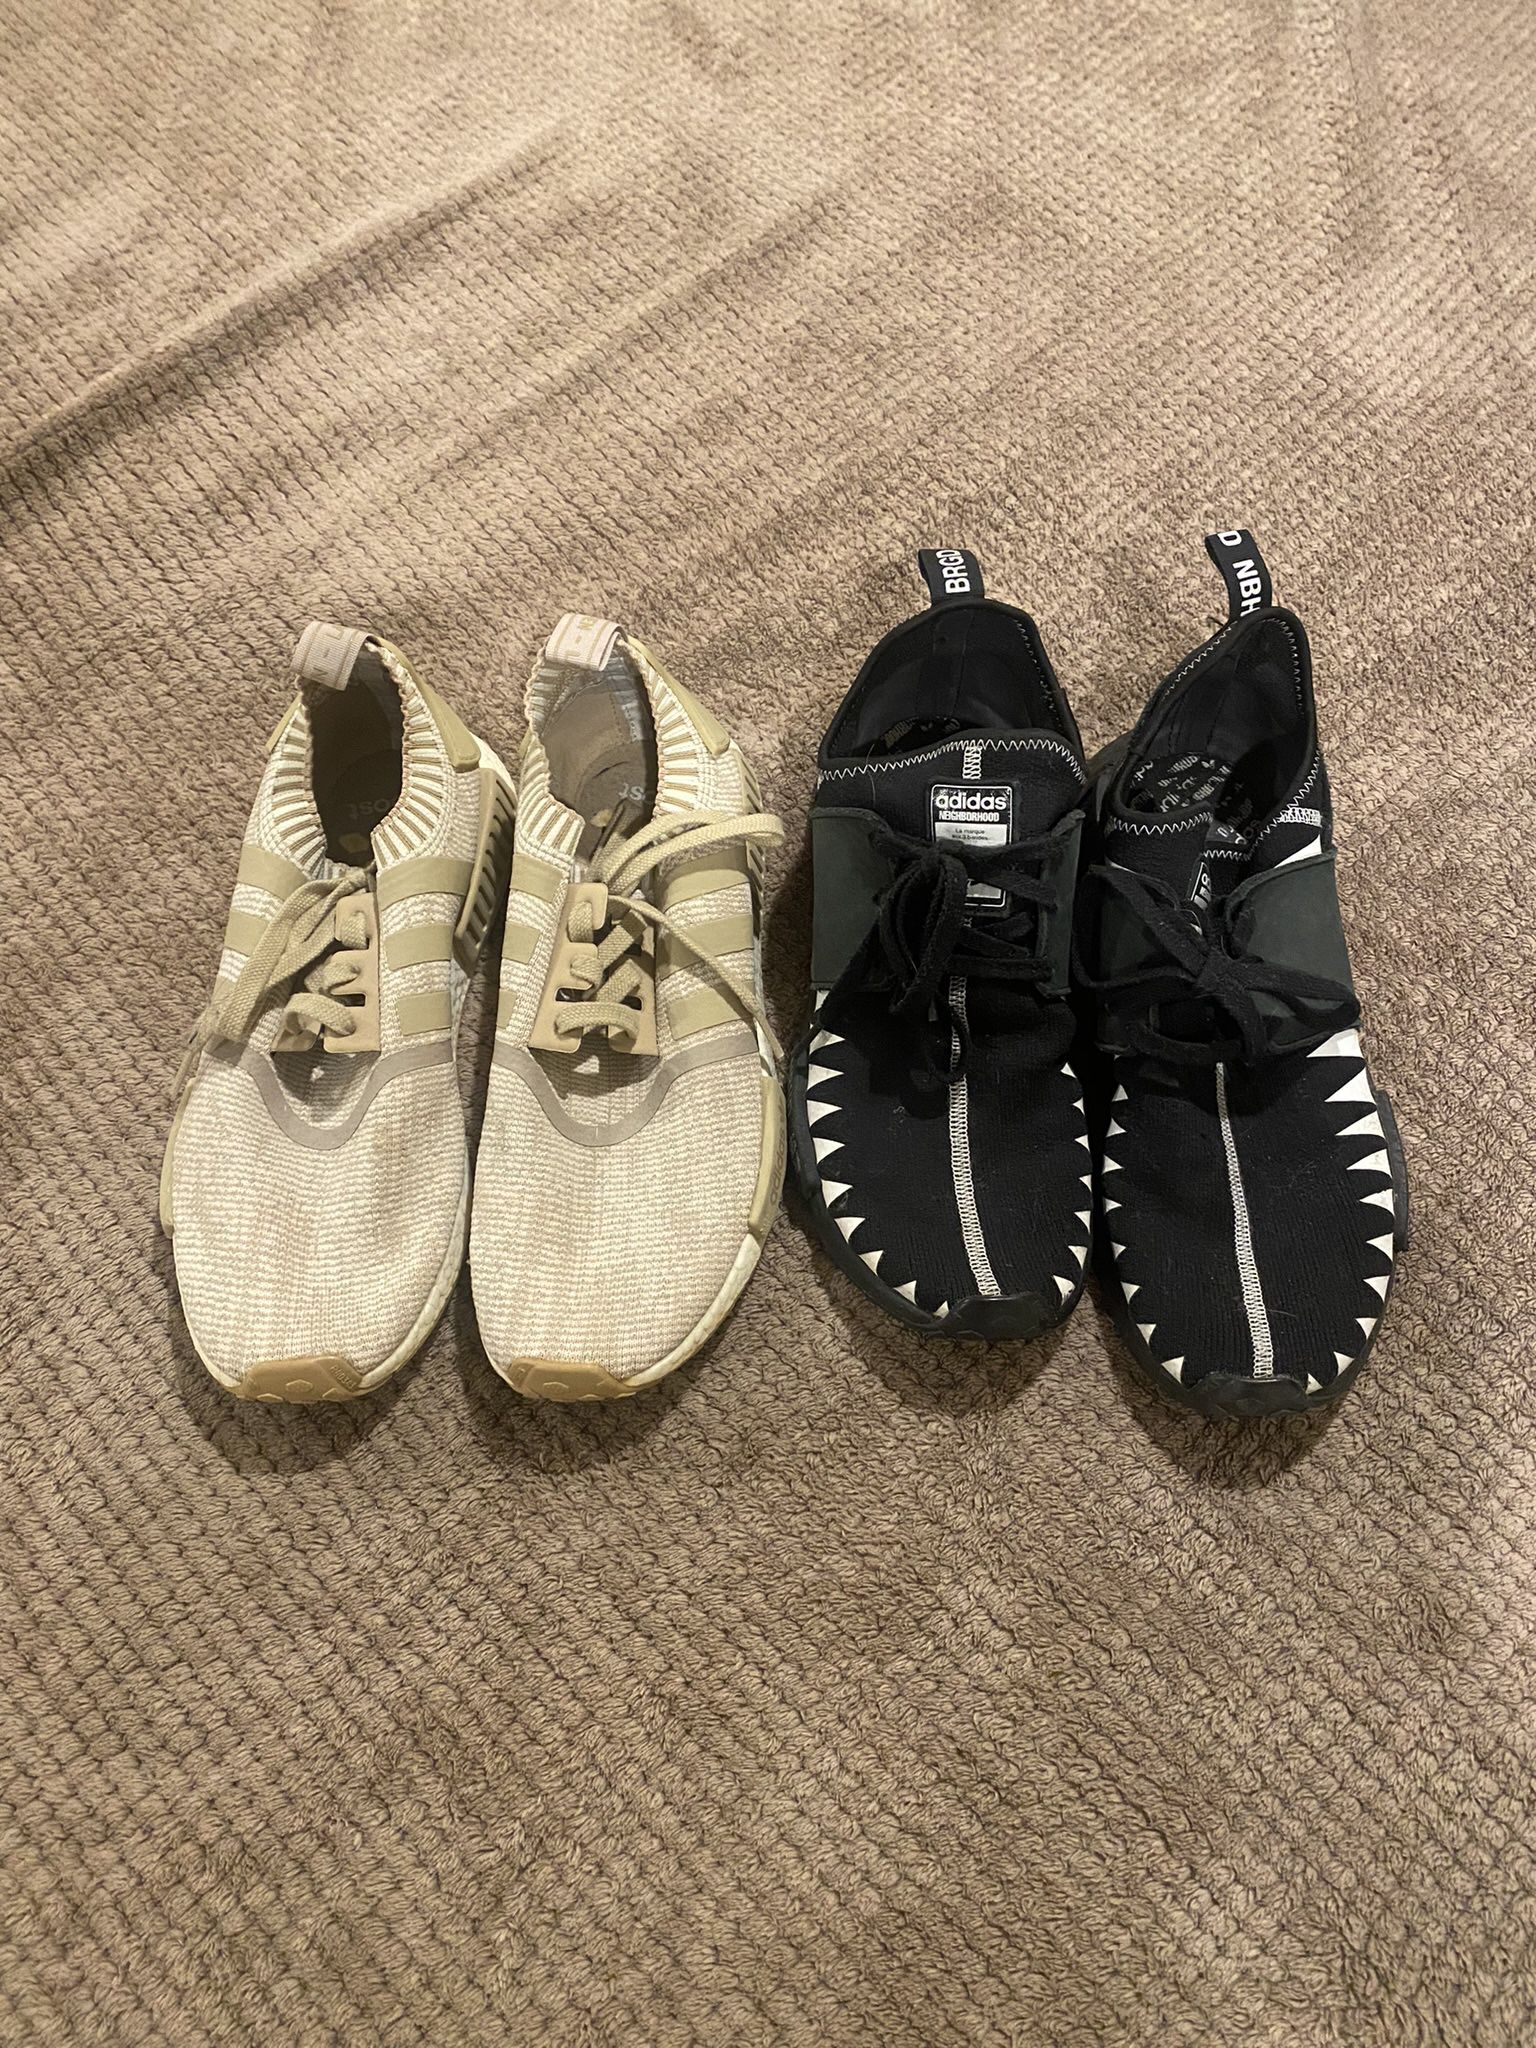 2 Pairs Of NMD Adidas Sneakers